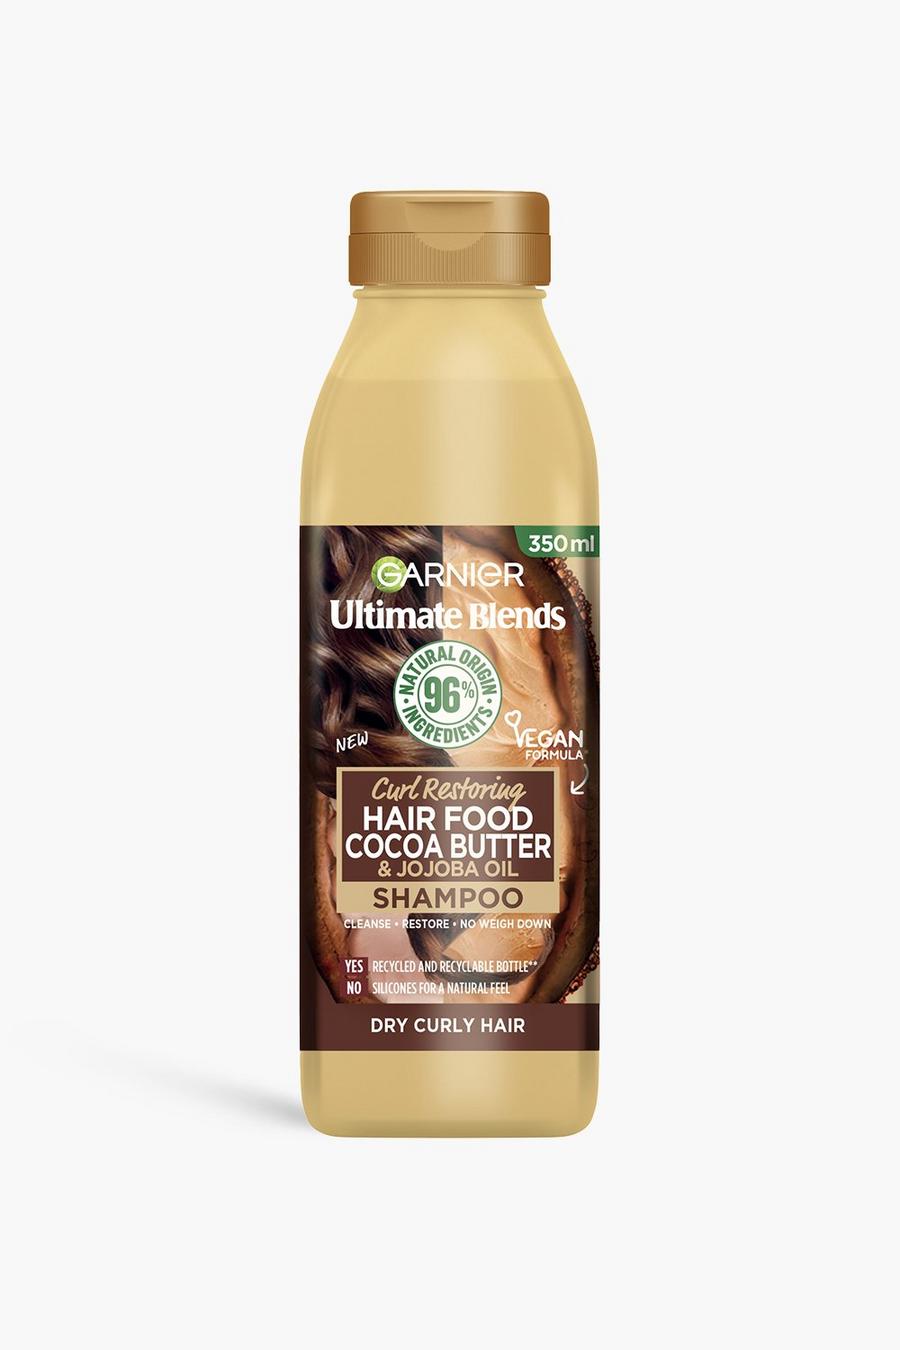 White Garnier Ultimate Blends Cocoa Butter Shampoo For Dry, Curly Hair